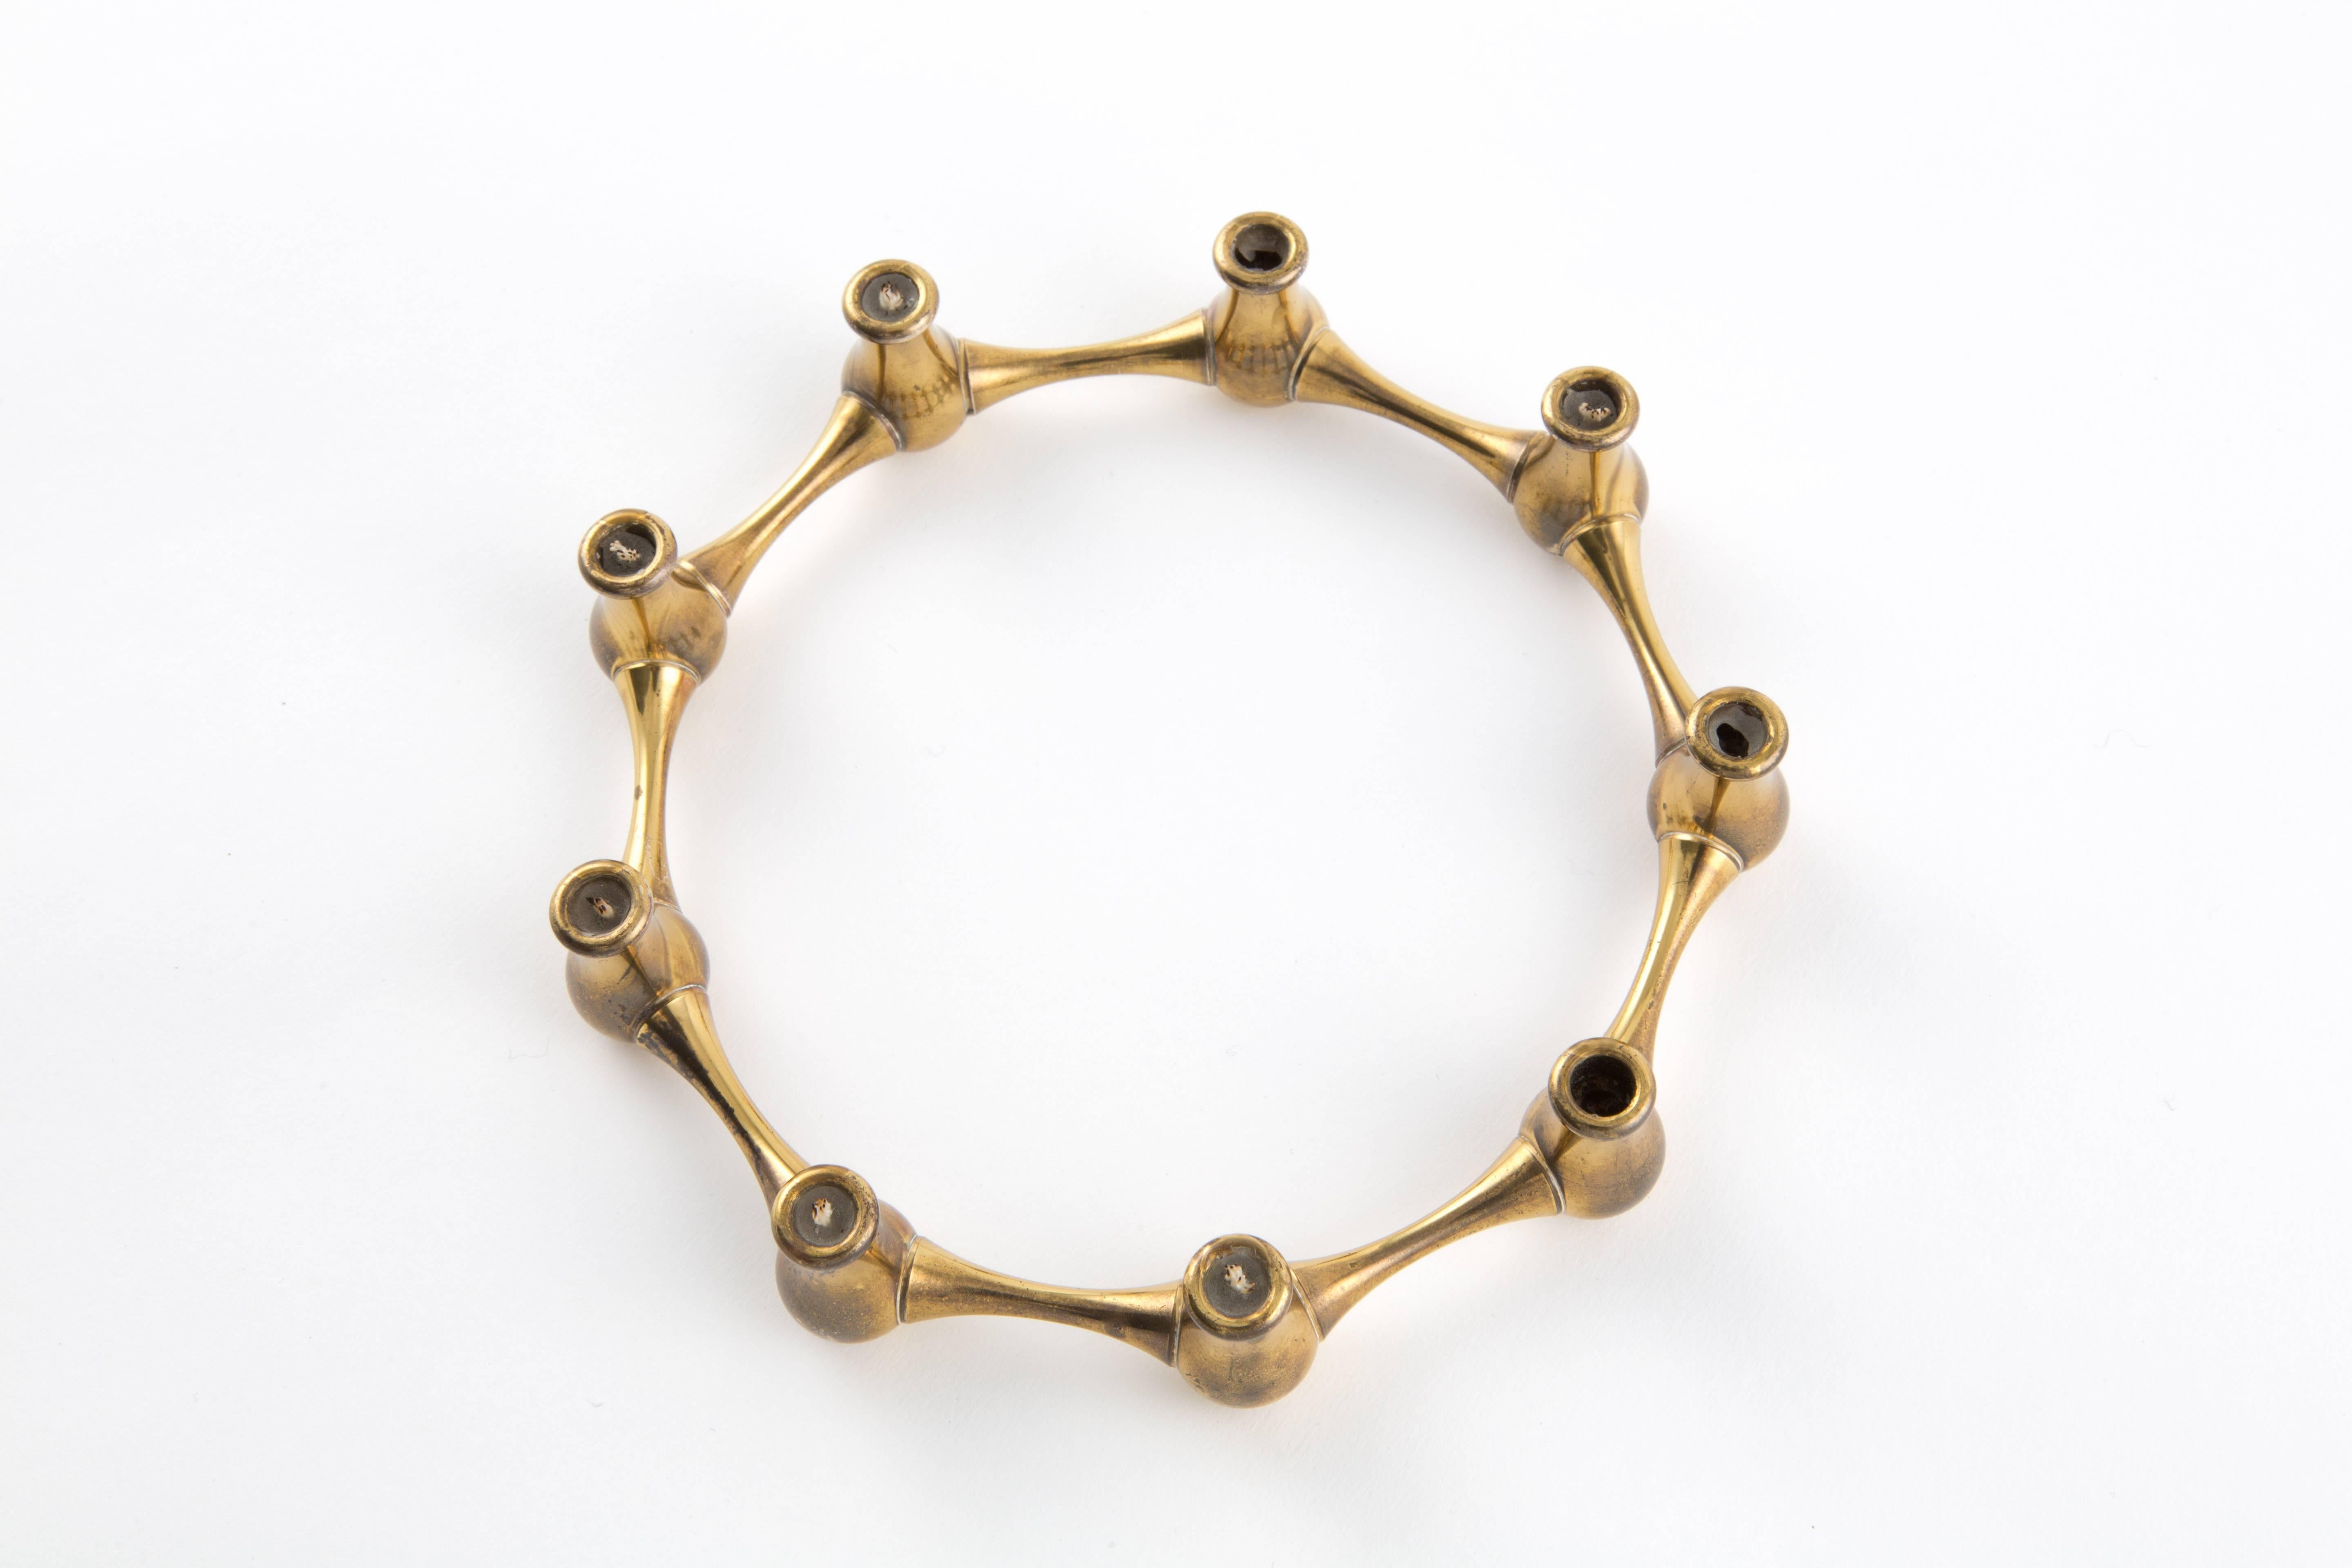 A brass candleholder from Denmark in the form of a circle. With nine candleholders.